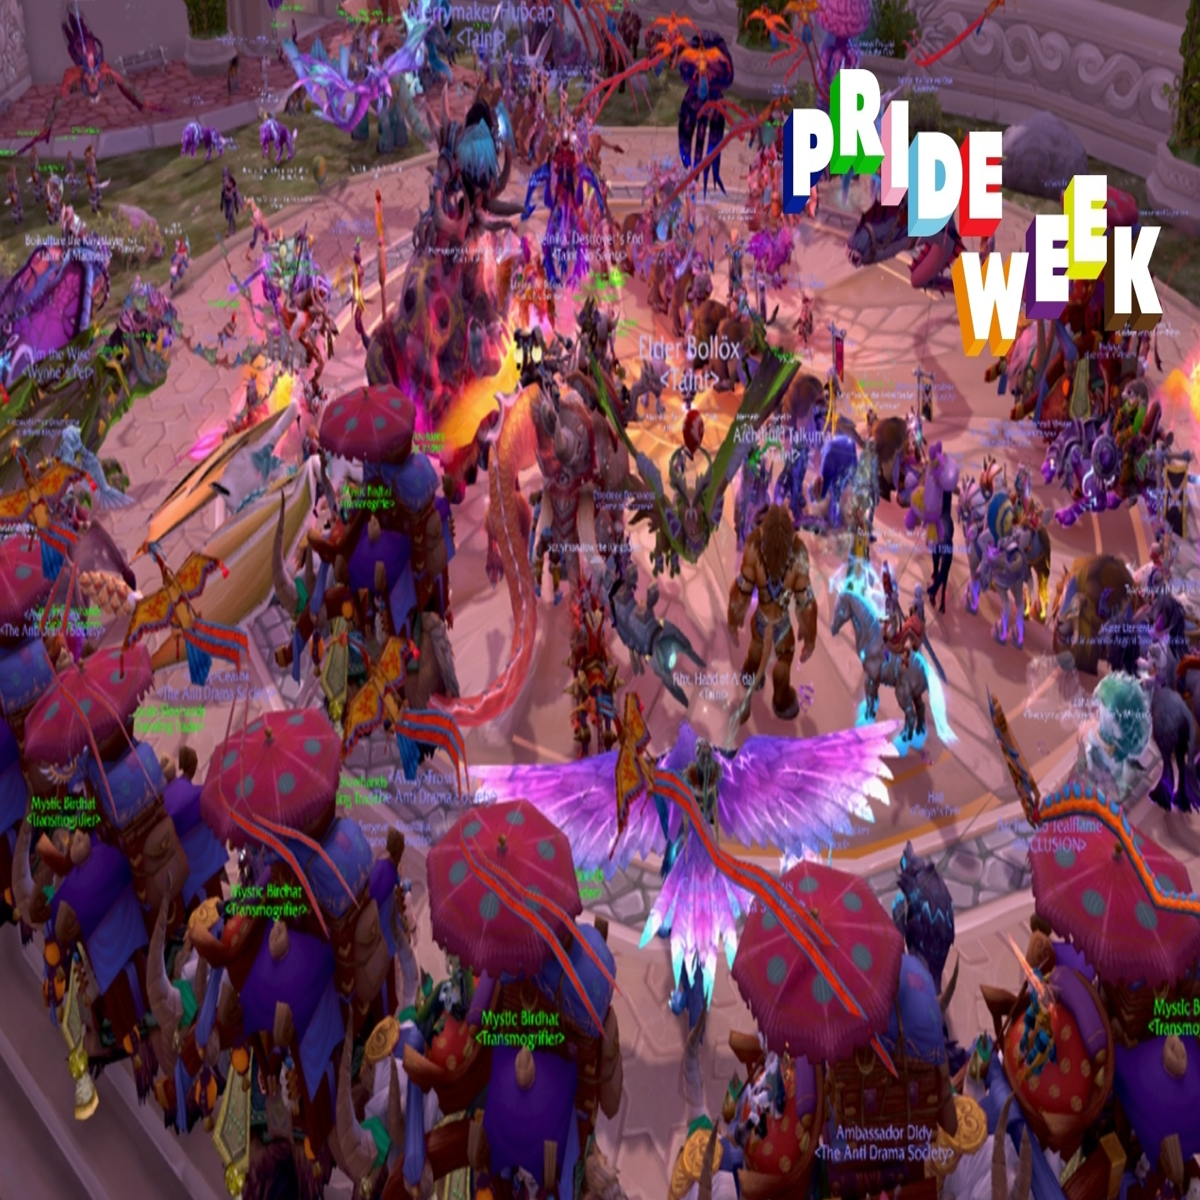 Pride Discord Servers To Find Your Tribe Online 2023